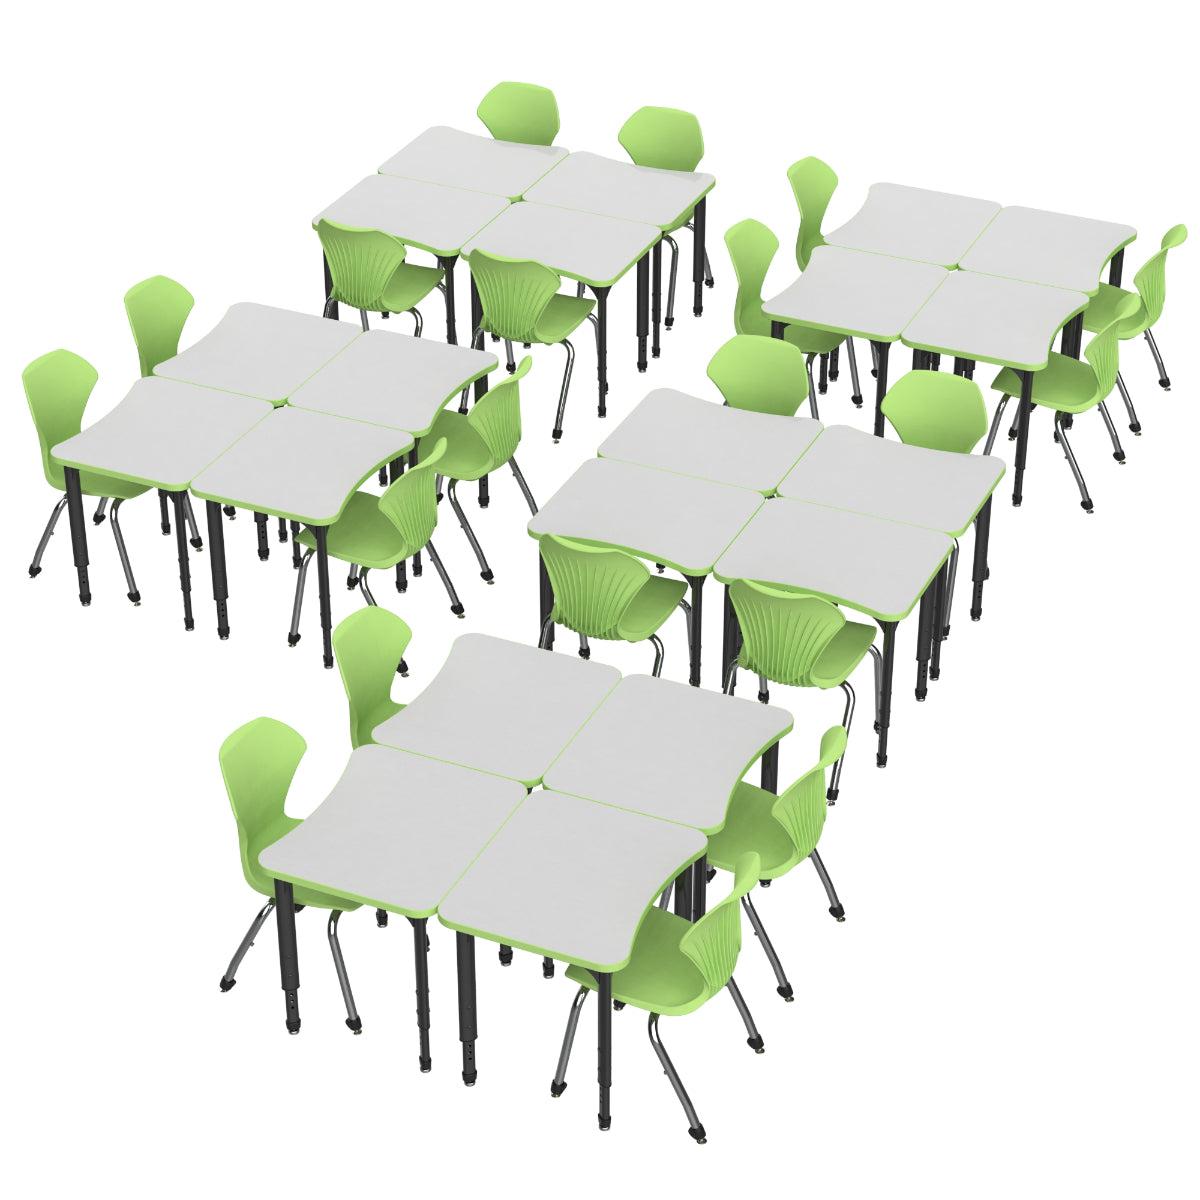 Apex Dry Erase Classroom Desk and Chair Package, 20 Curved Collaborative Student Desks with 20 Apex Stack Chairs